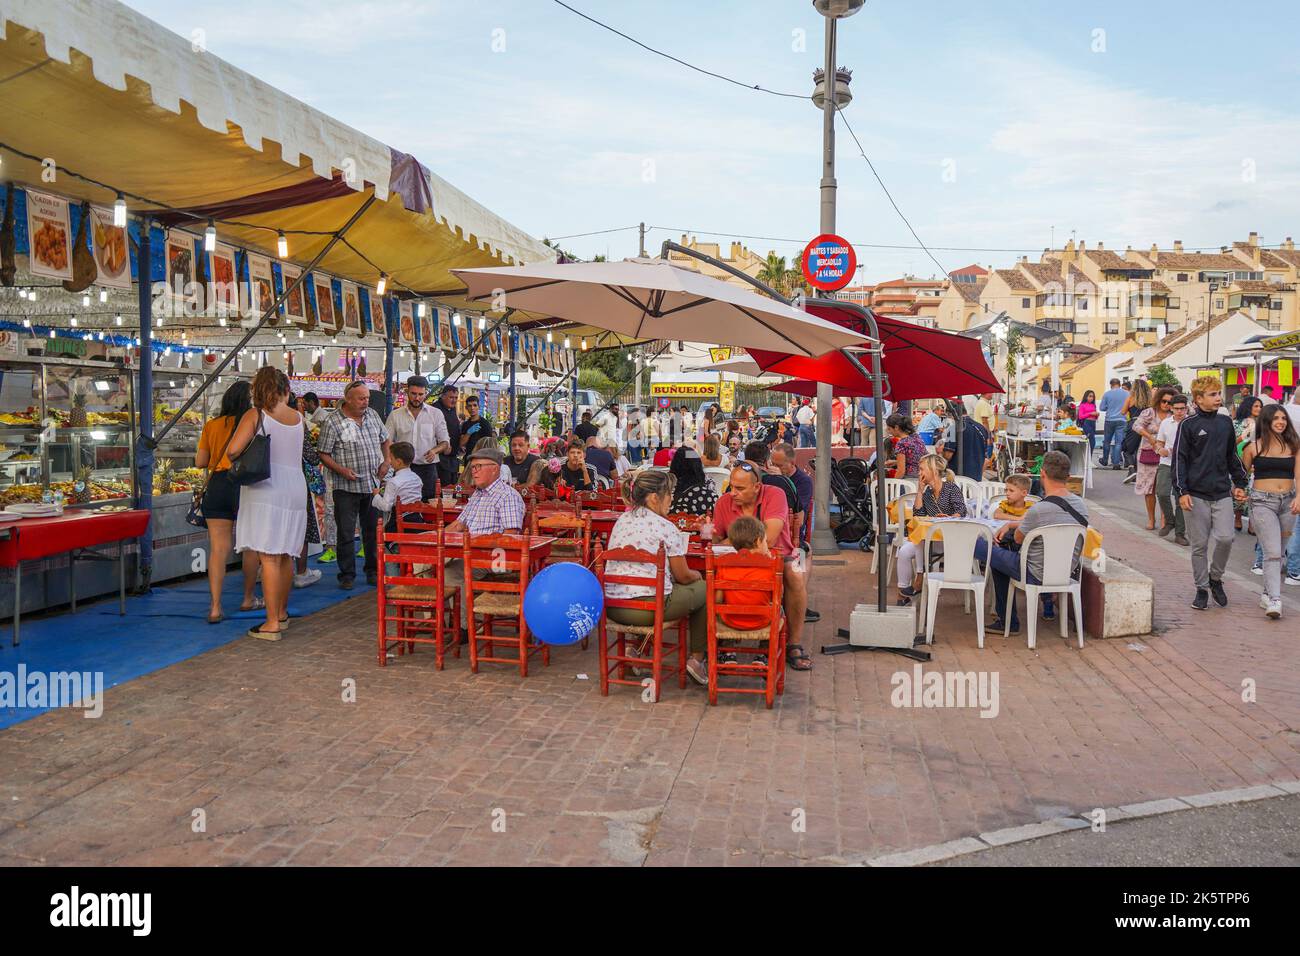 Food stand meat,  terrace, at annual celebration of the festive Feria in Fuengirola, Costa del Sol, Spain. Stock Photo